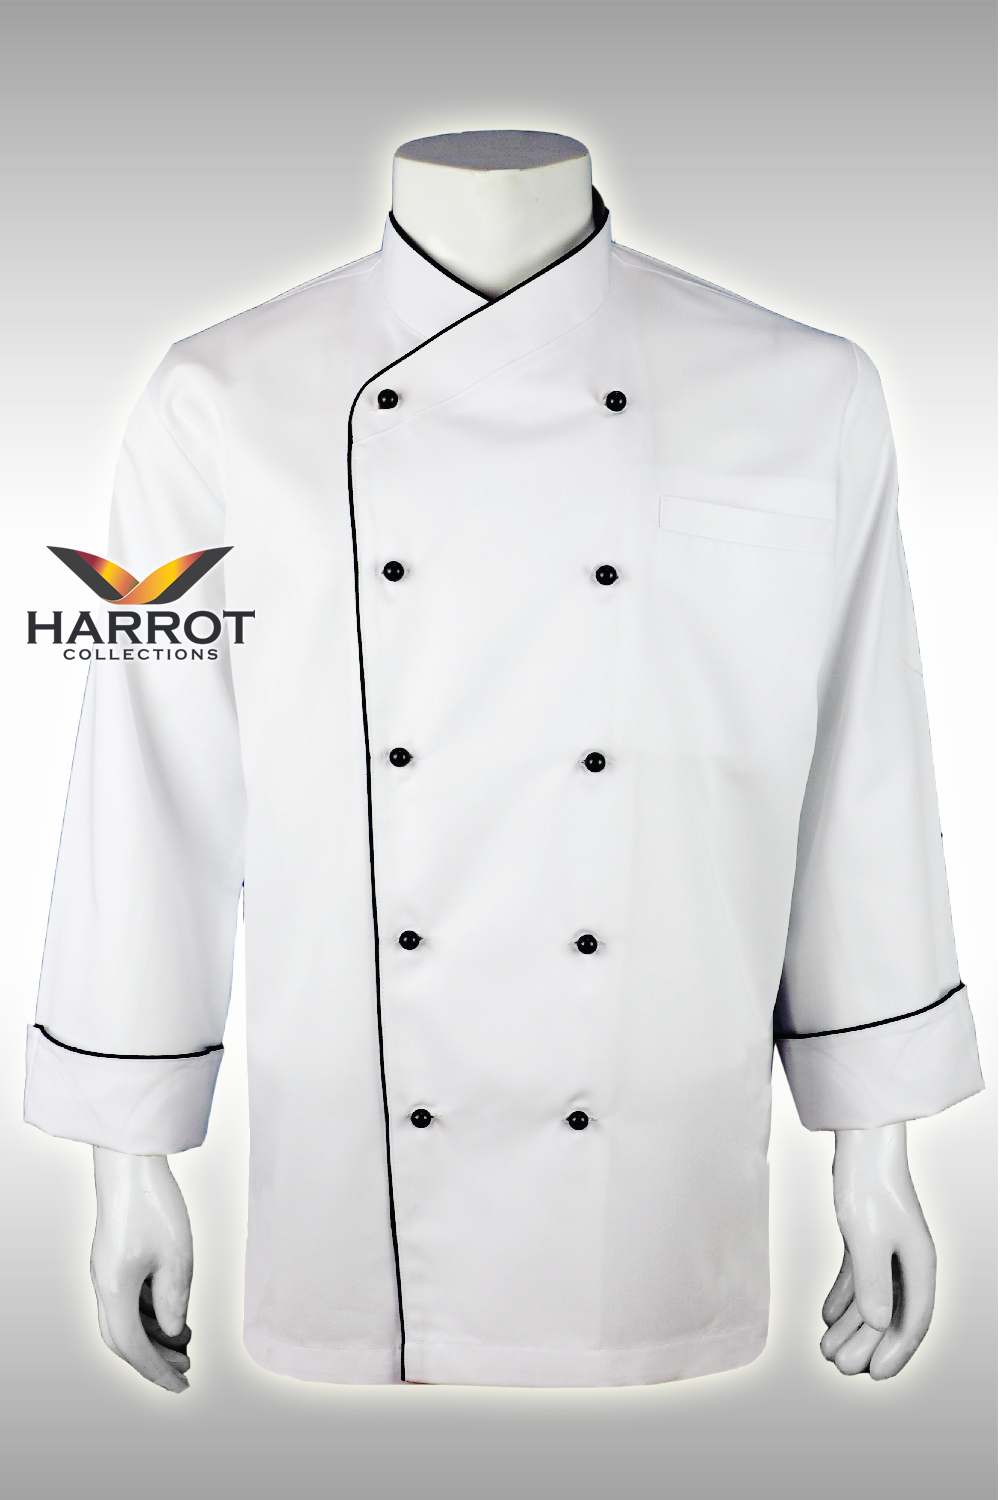 INS02 CHEFS WHITE JACKET FULL SLEEVES WHITE WITH BLACK POPPER BUTTONS 